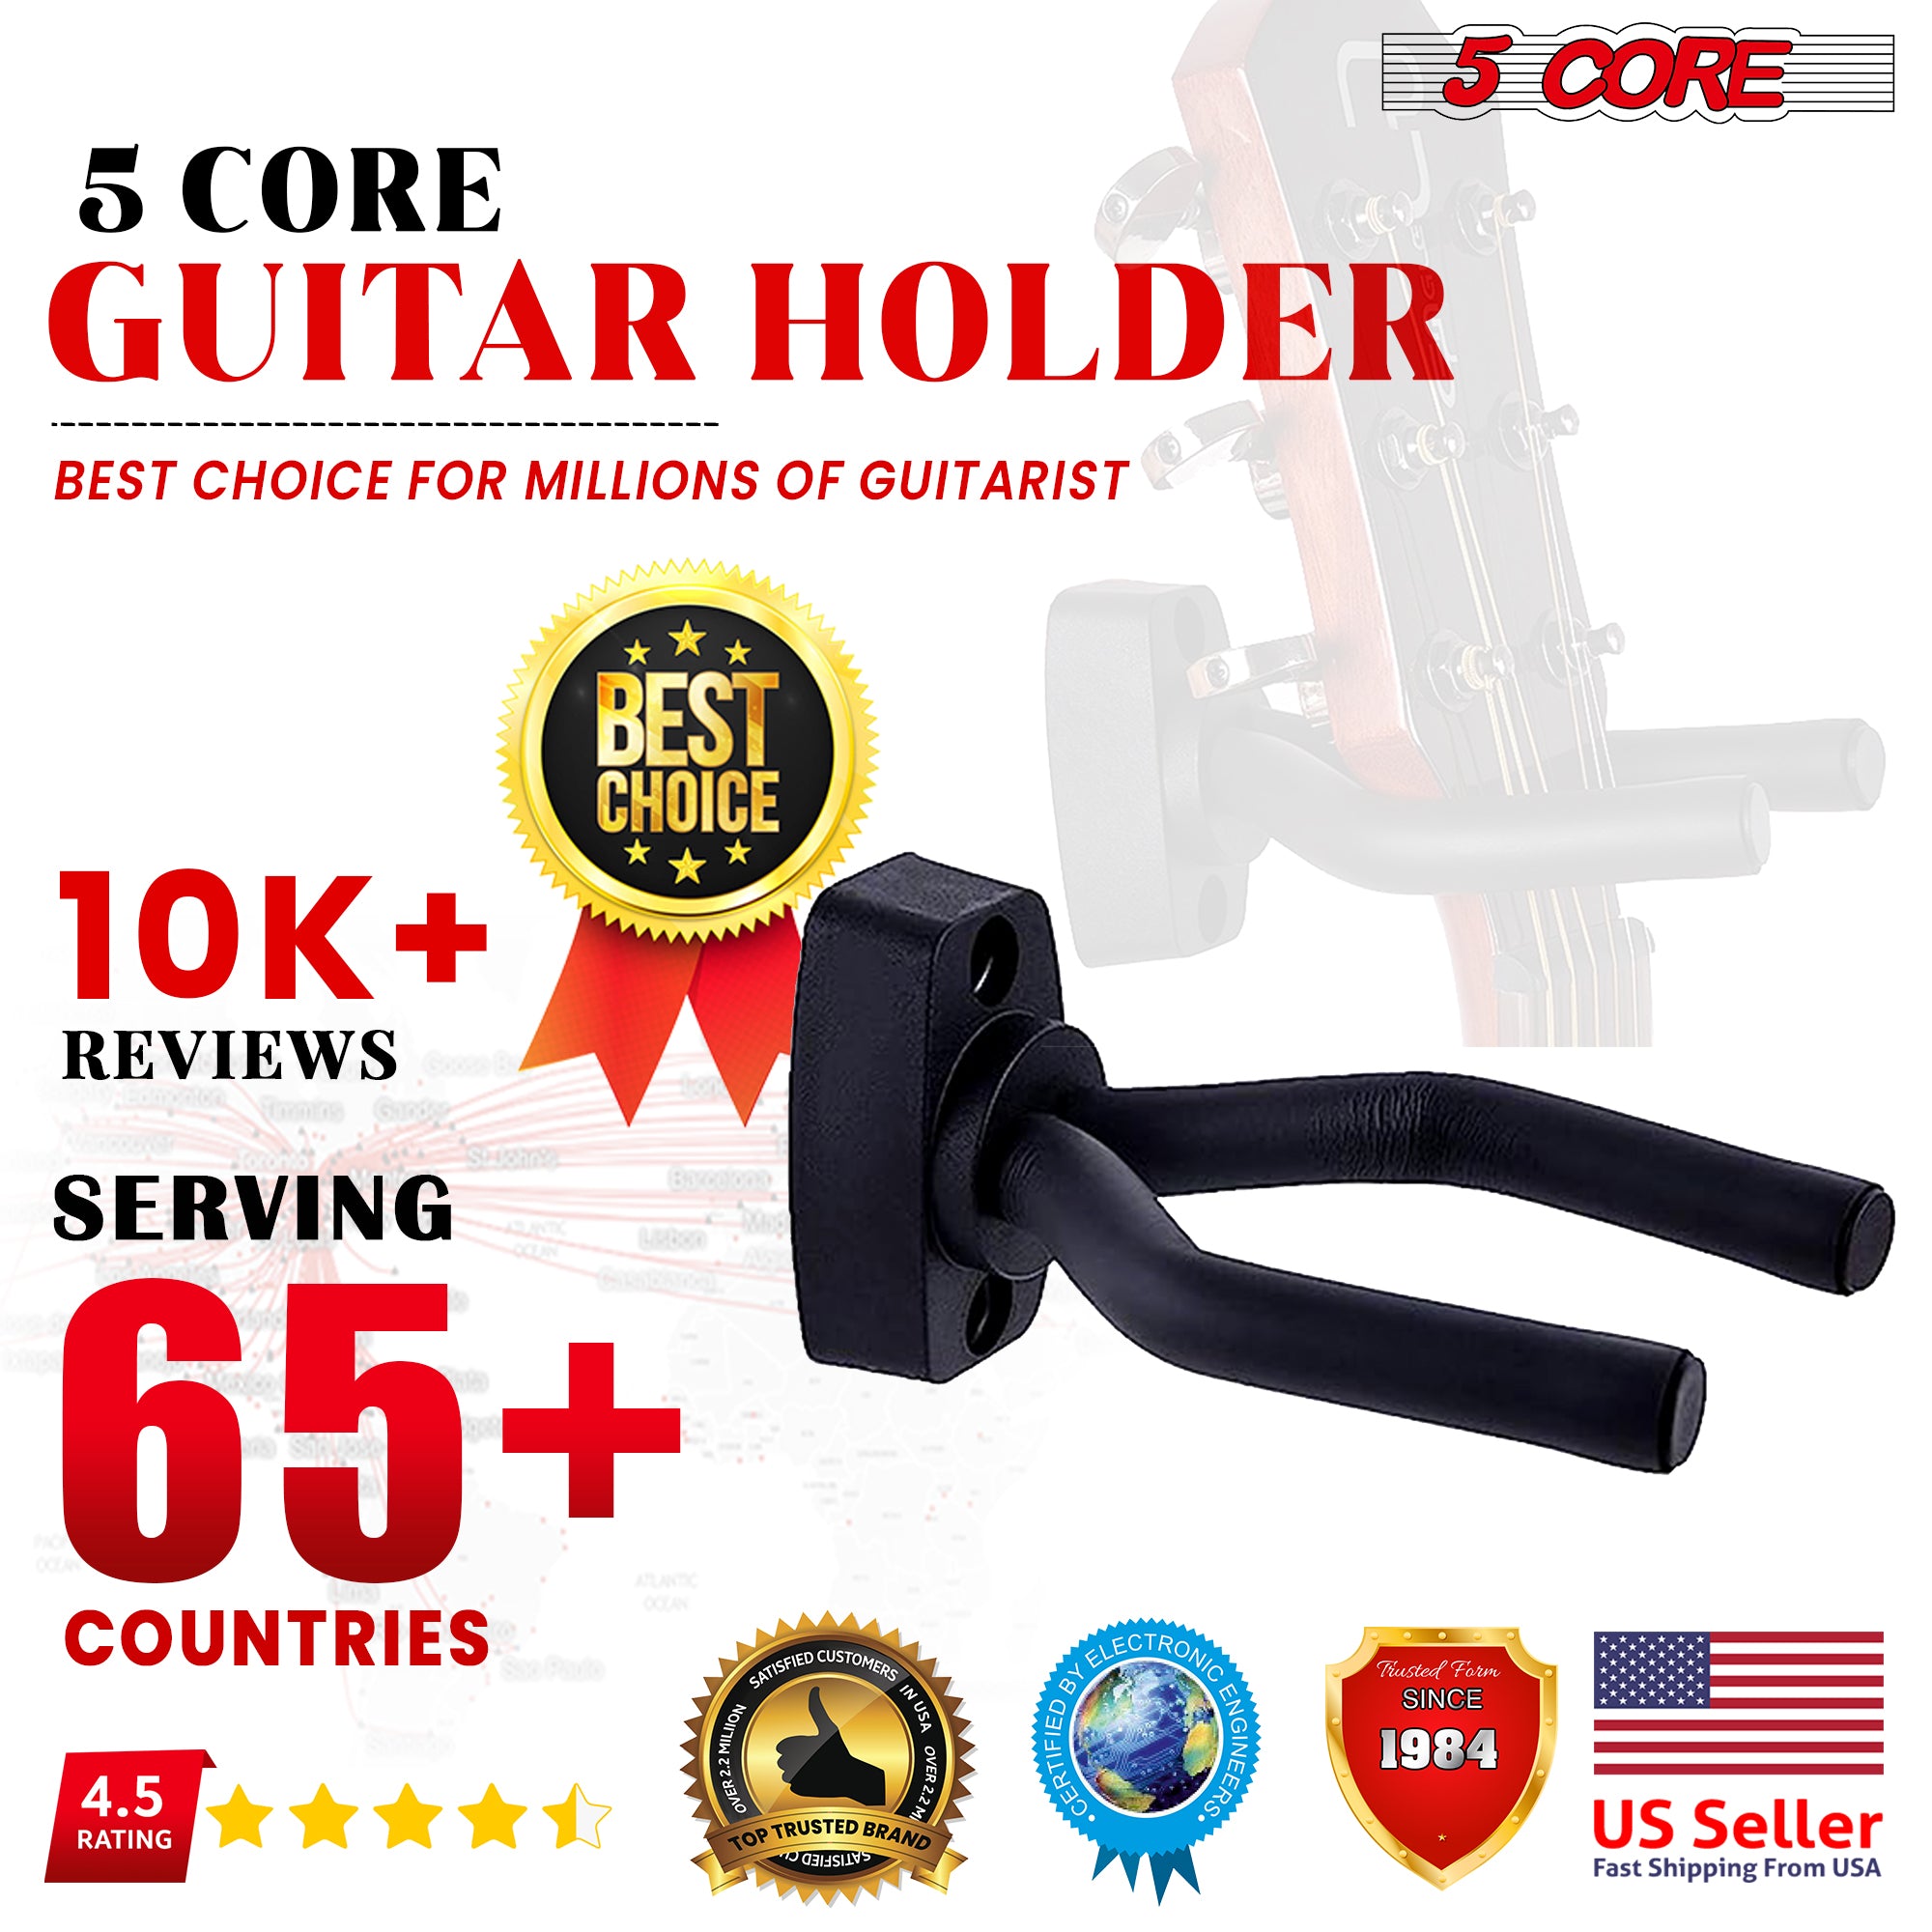 Safely Hang Your Guitar with 5 Core Wall Holder